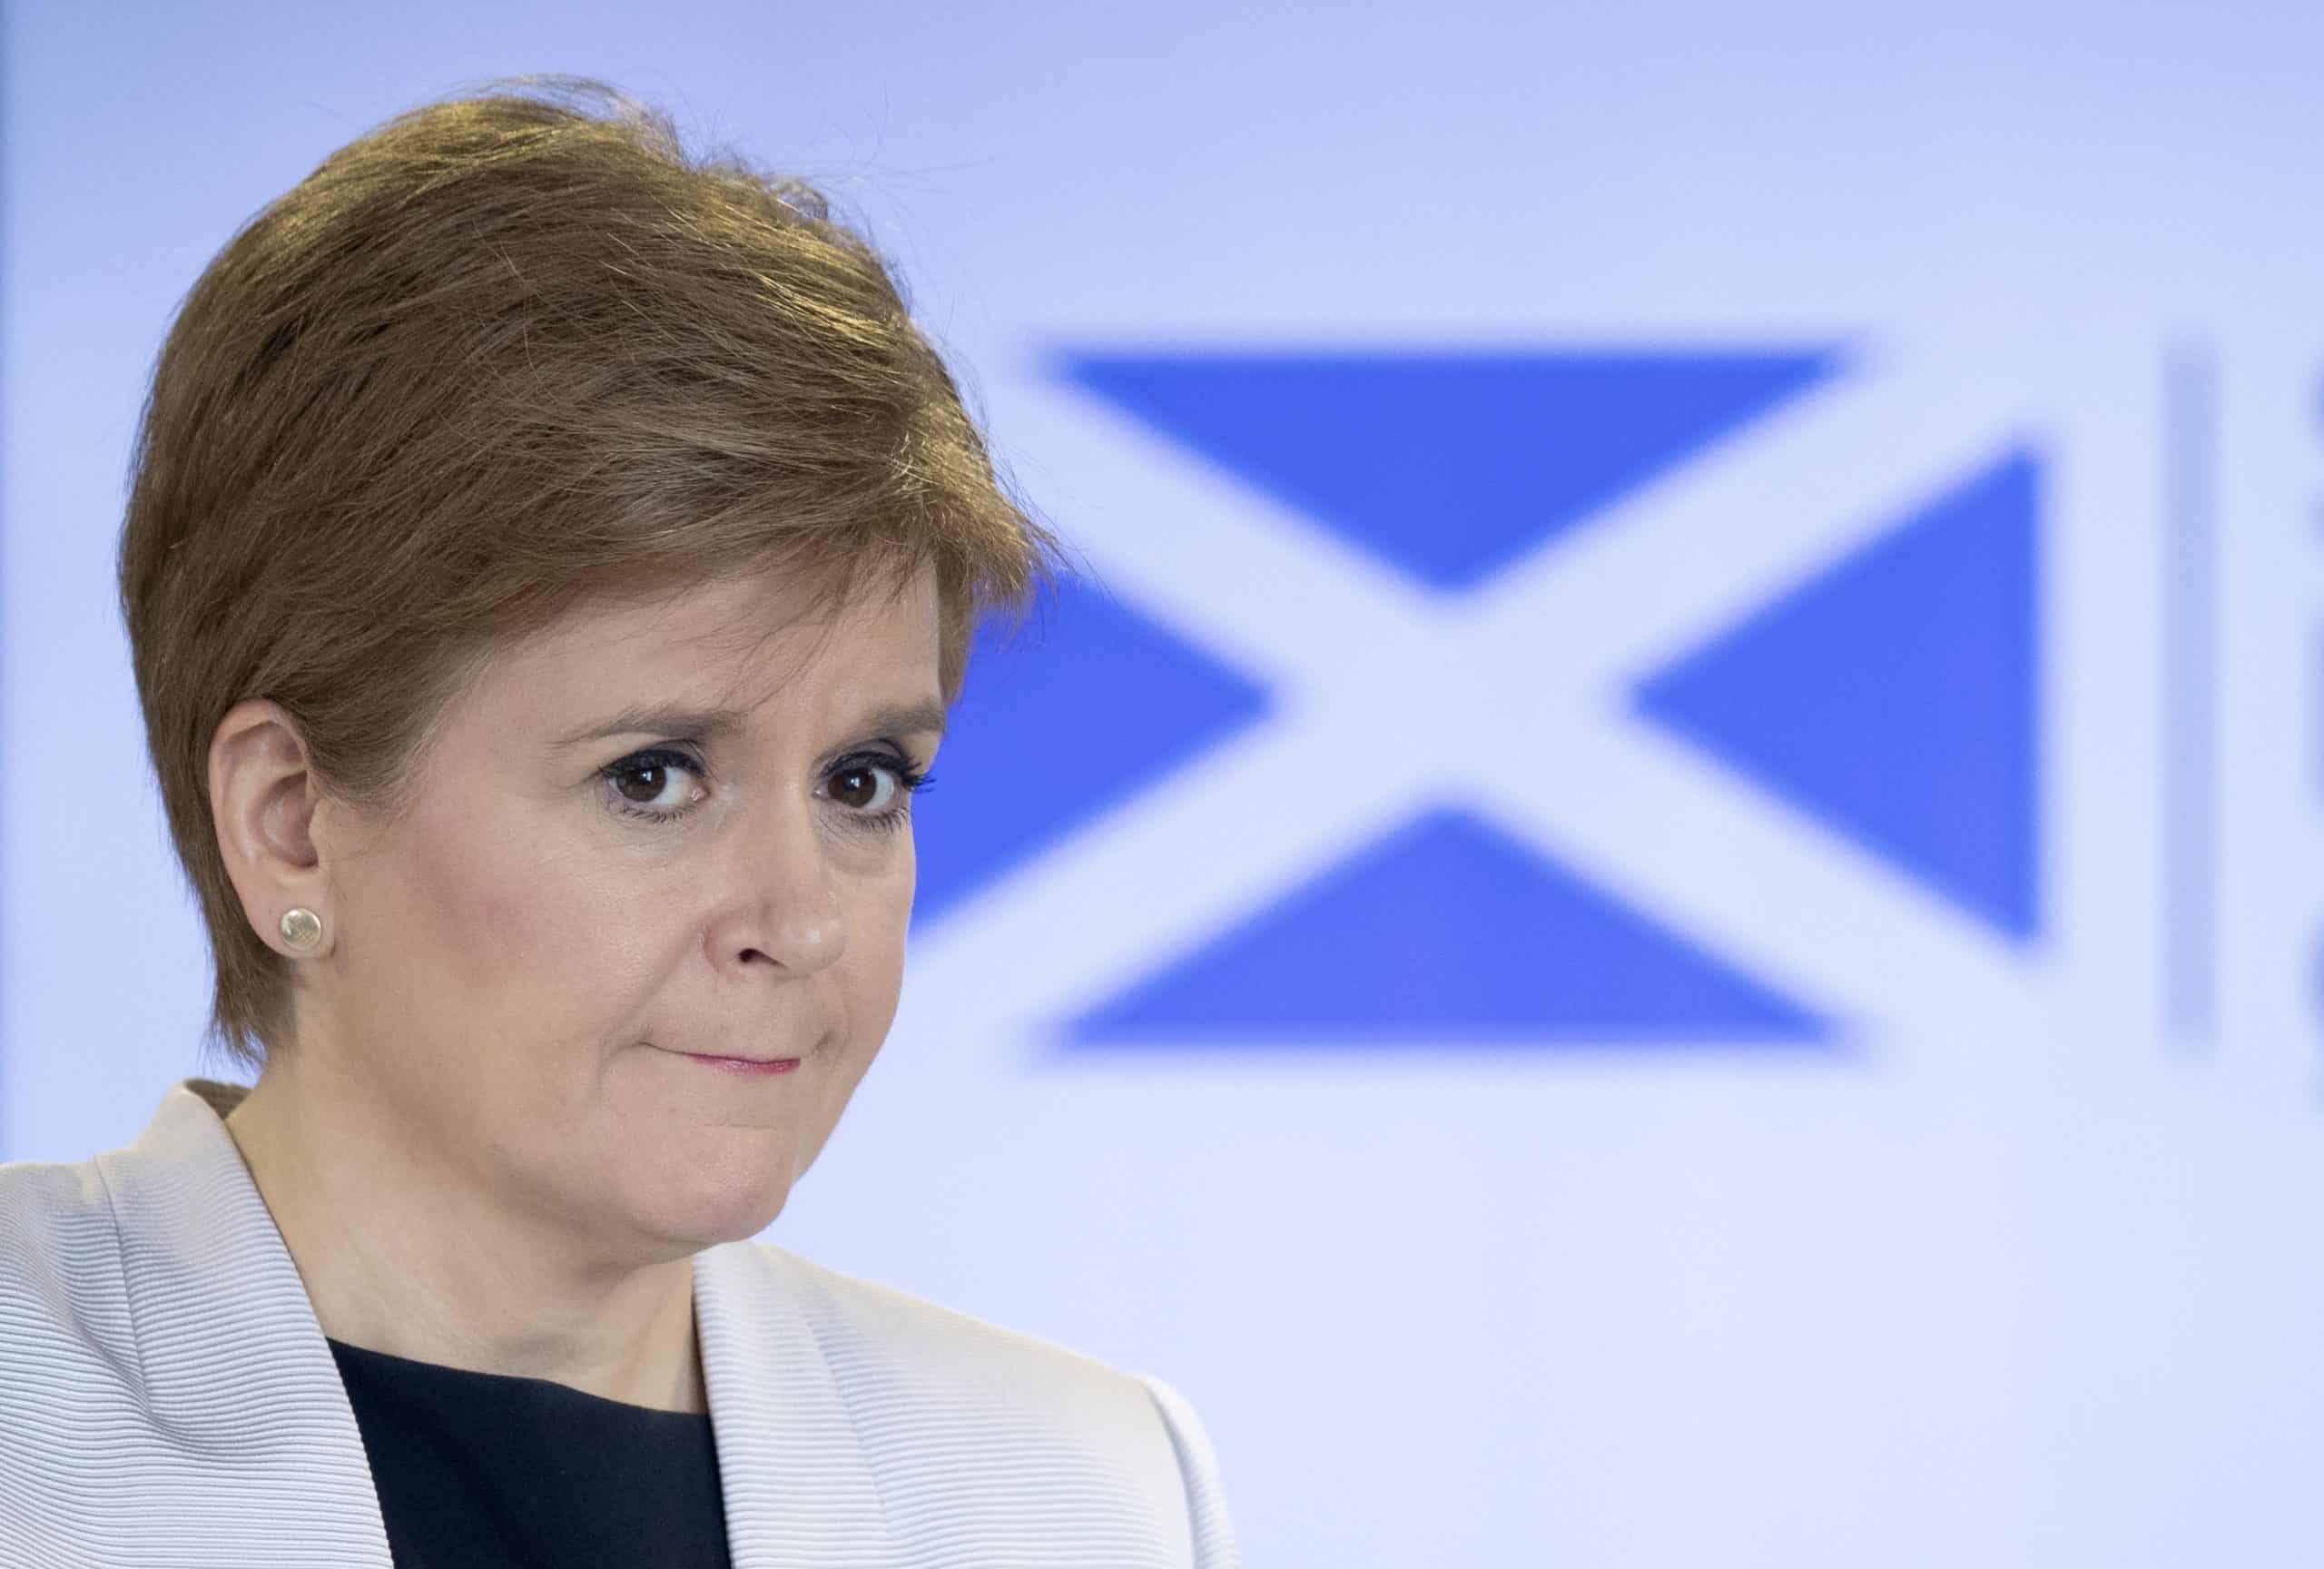 Watch: Sturgeon accuses Andrew Marr of ‘deference’ to Johnson